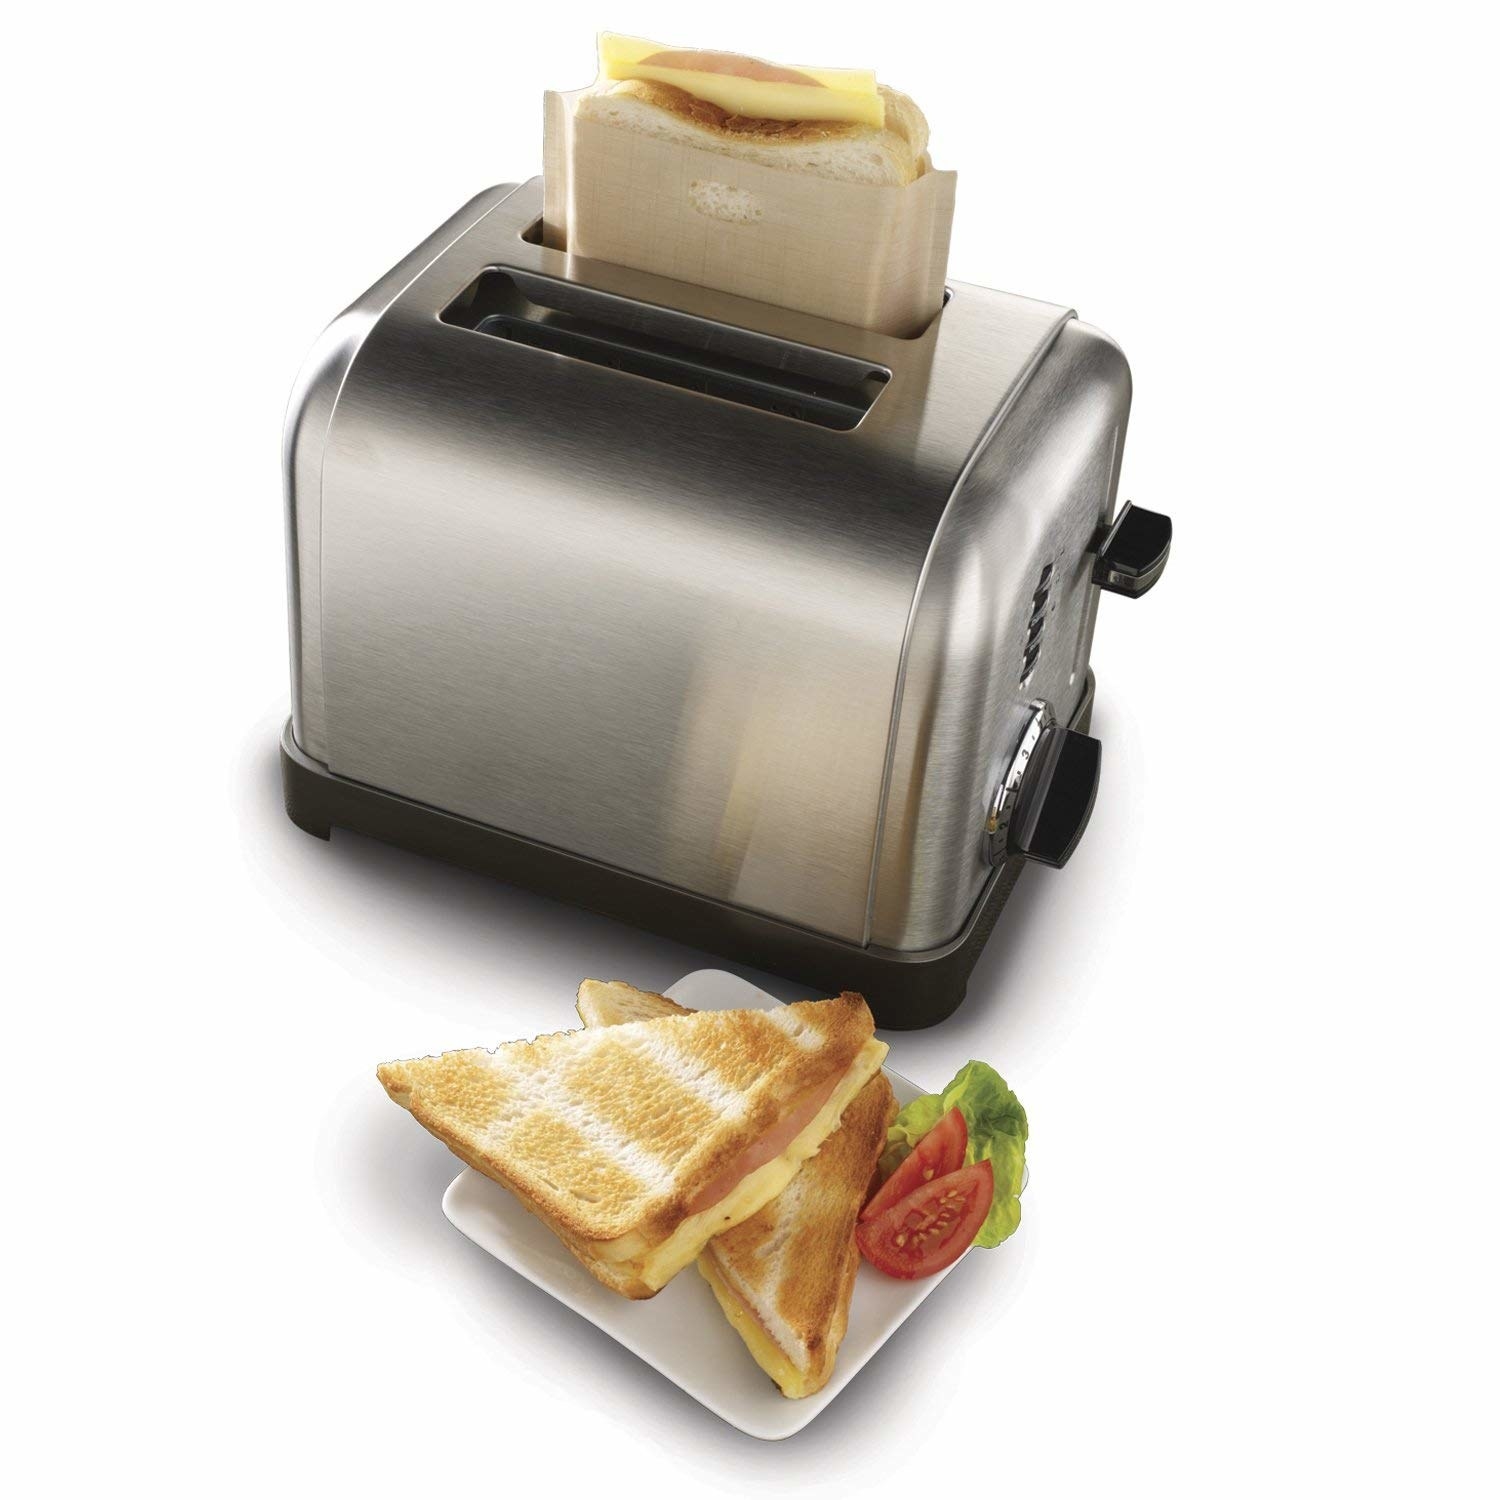 A grilled cheese sandwich, and a toaster with another grilled cheese in the bag